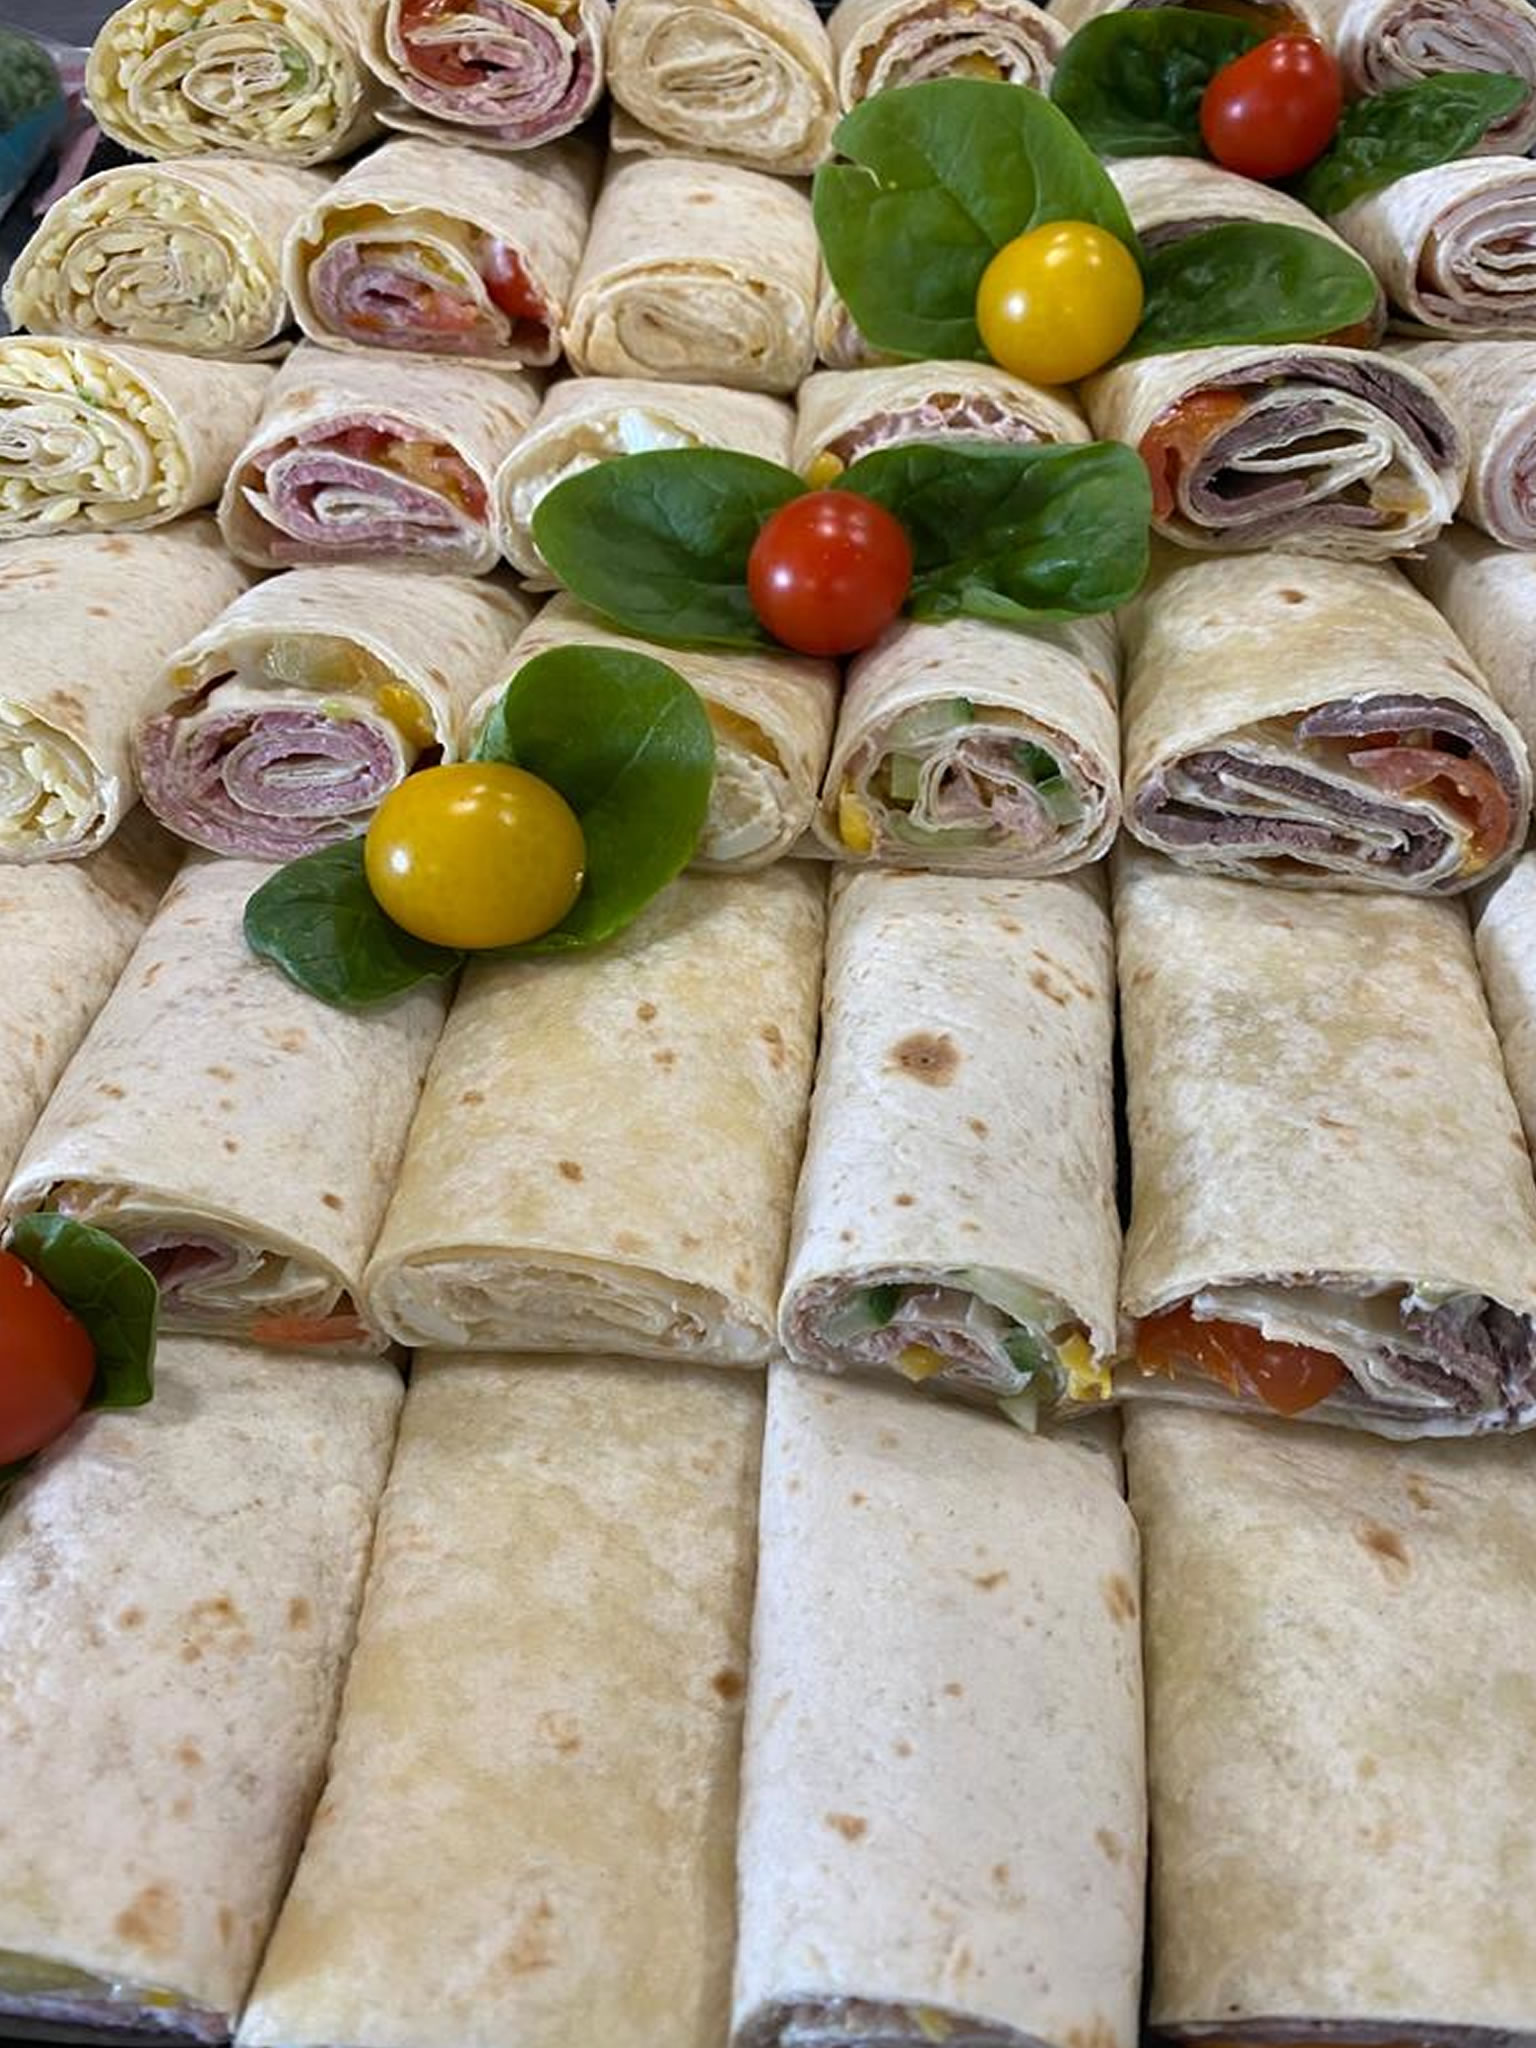 Assorted Tortilla Wraps by Ellesmere Port Catering